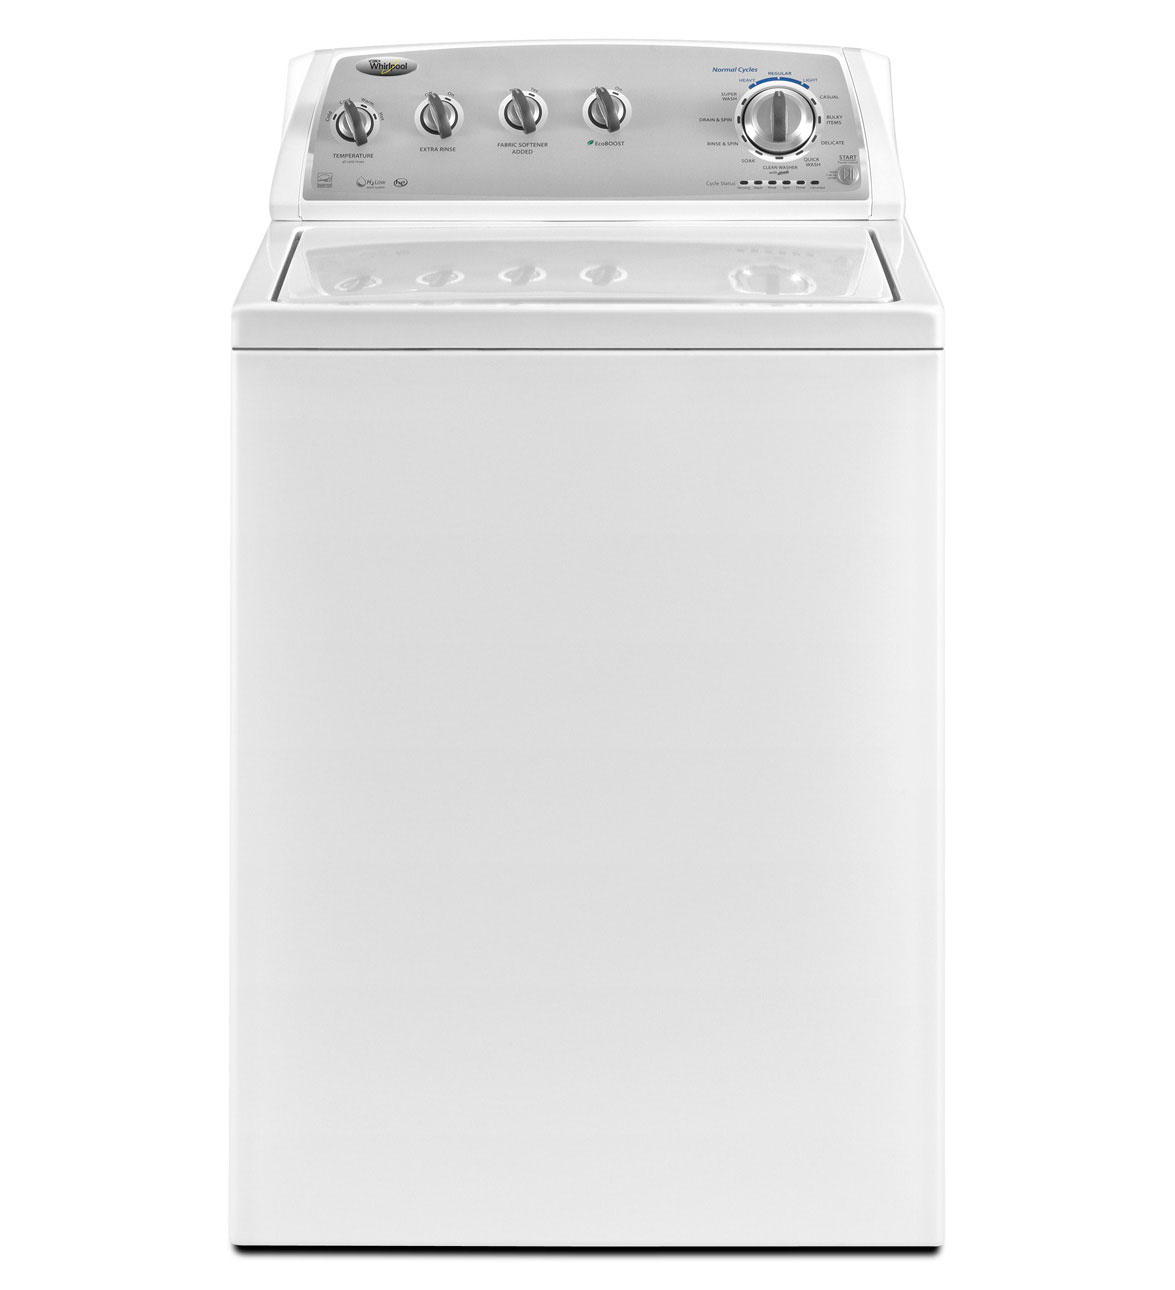 Whirlpool 3.6 cu ft High-Efficiency Top-Load Washer (White) ENERGY STAR (Model: WTW4950XW)